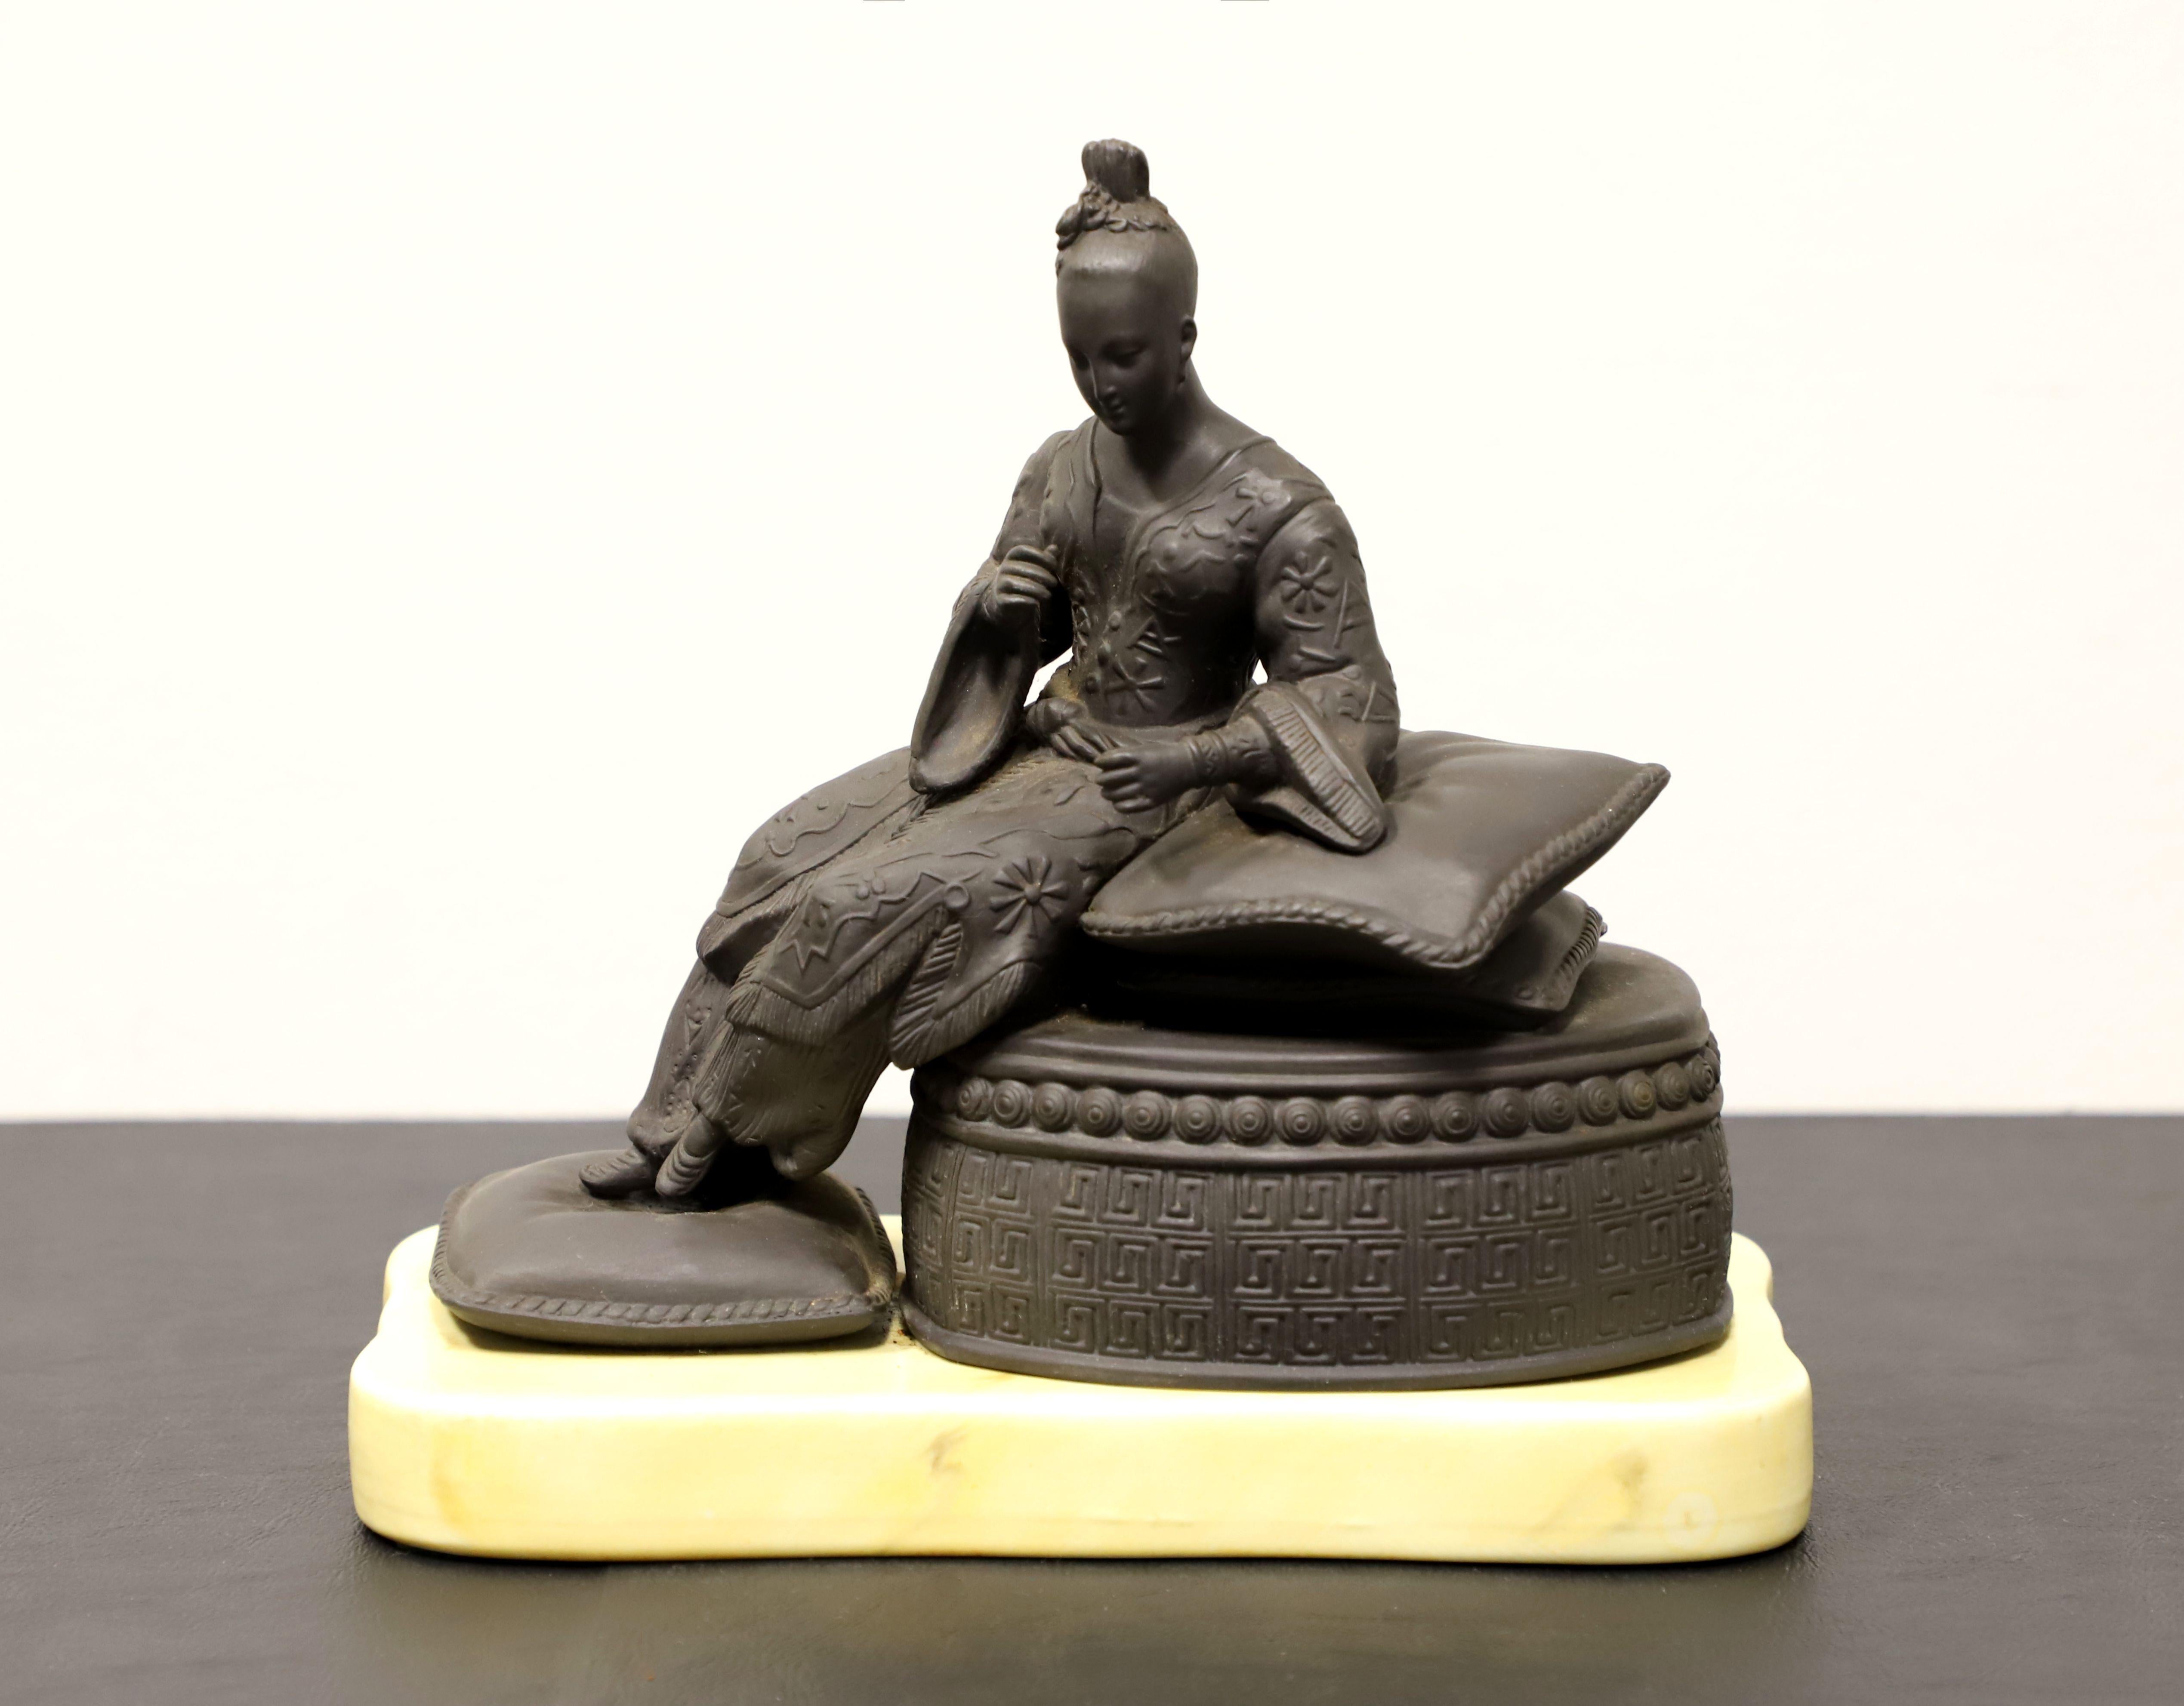 A table top sculpture by Mottahedeh. Hand carved from black basalt depicting an elegantly dressed woman reclining on pillows atop a round ottoman with her feet resting on a pillow. Sculpture is mounted to a creamy white color porcelain base. Made in